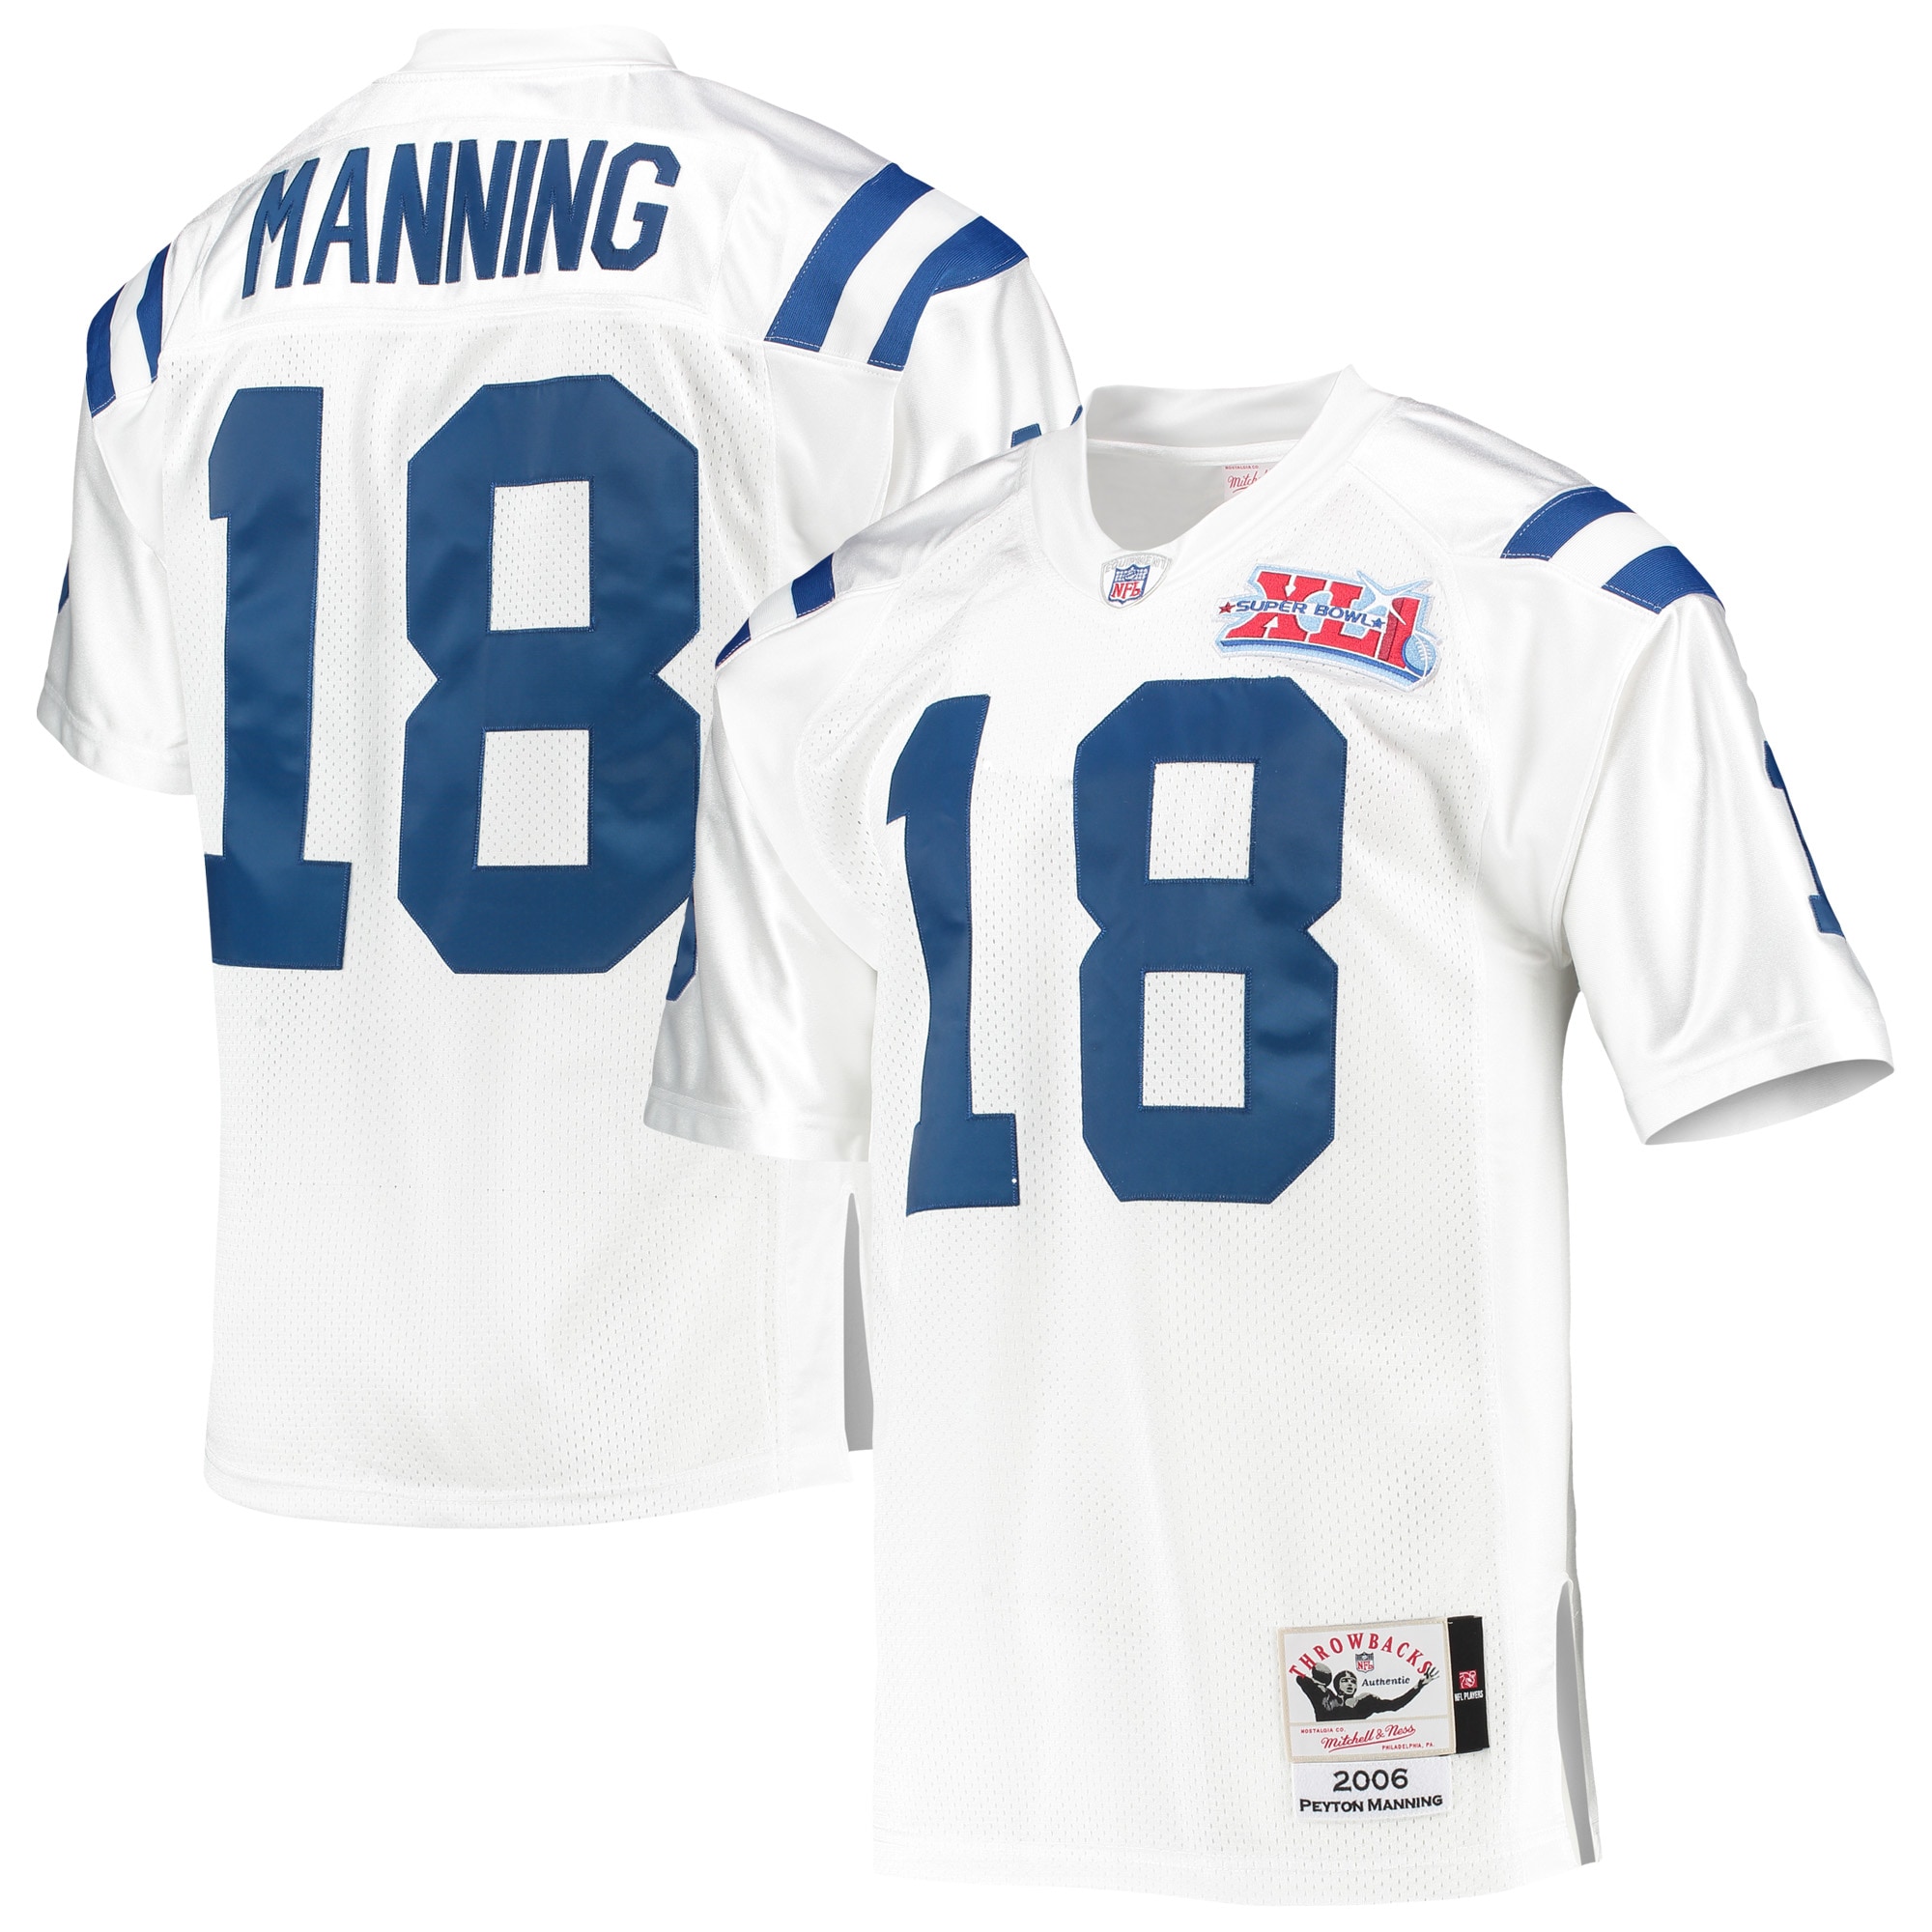 Men's Indianapolis Colts Jerseys White Peyton Manning 2006 Super Bowl XLI Authentic Retired Player Style